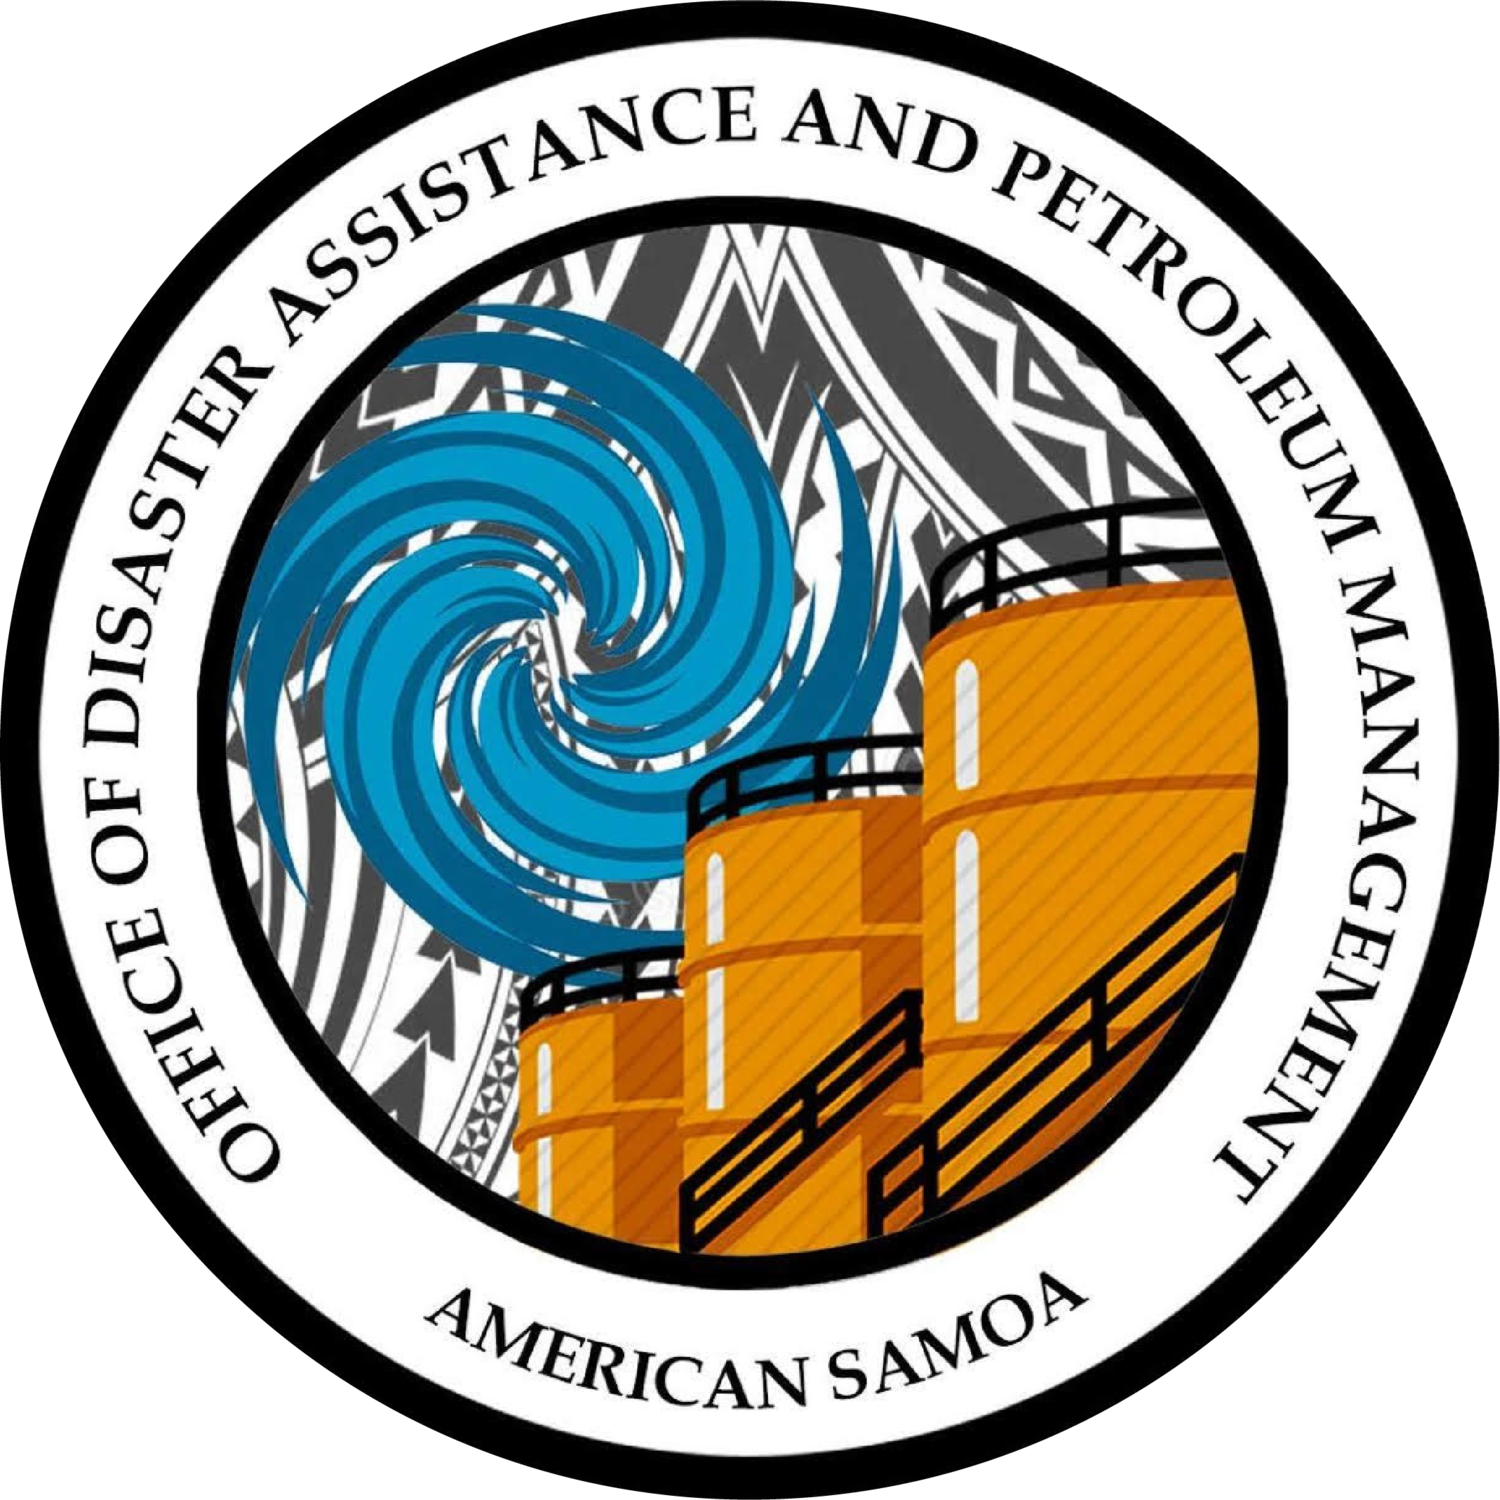 OFFICE OF DISASTER ASSISTANCE AND PETROLEUM MANAGEMENT